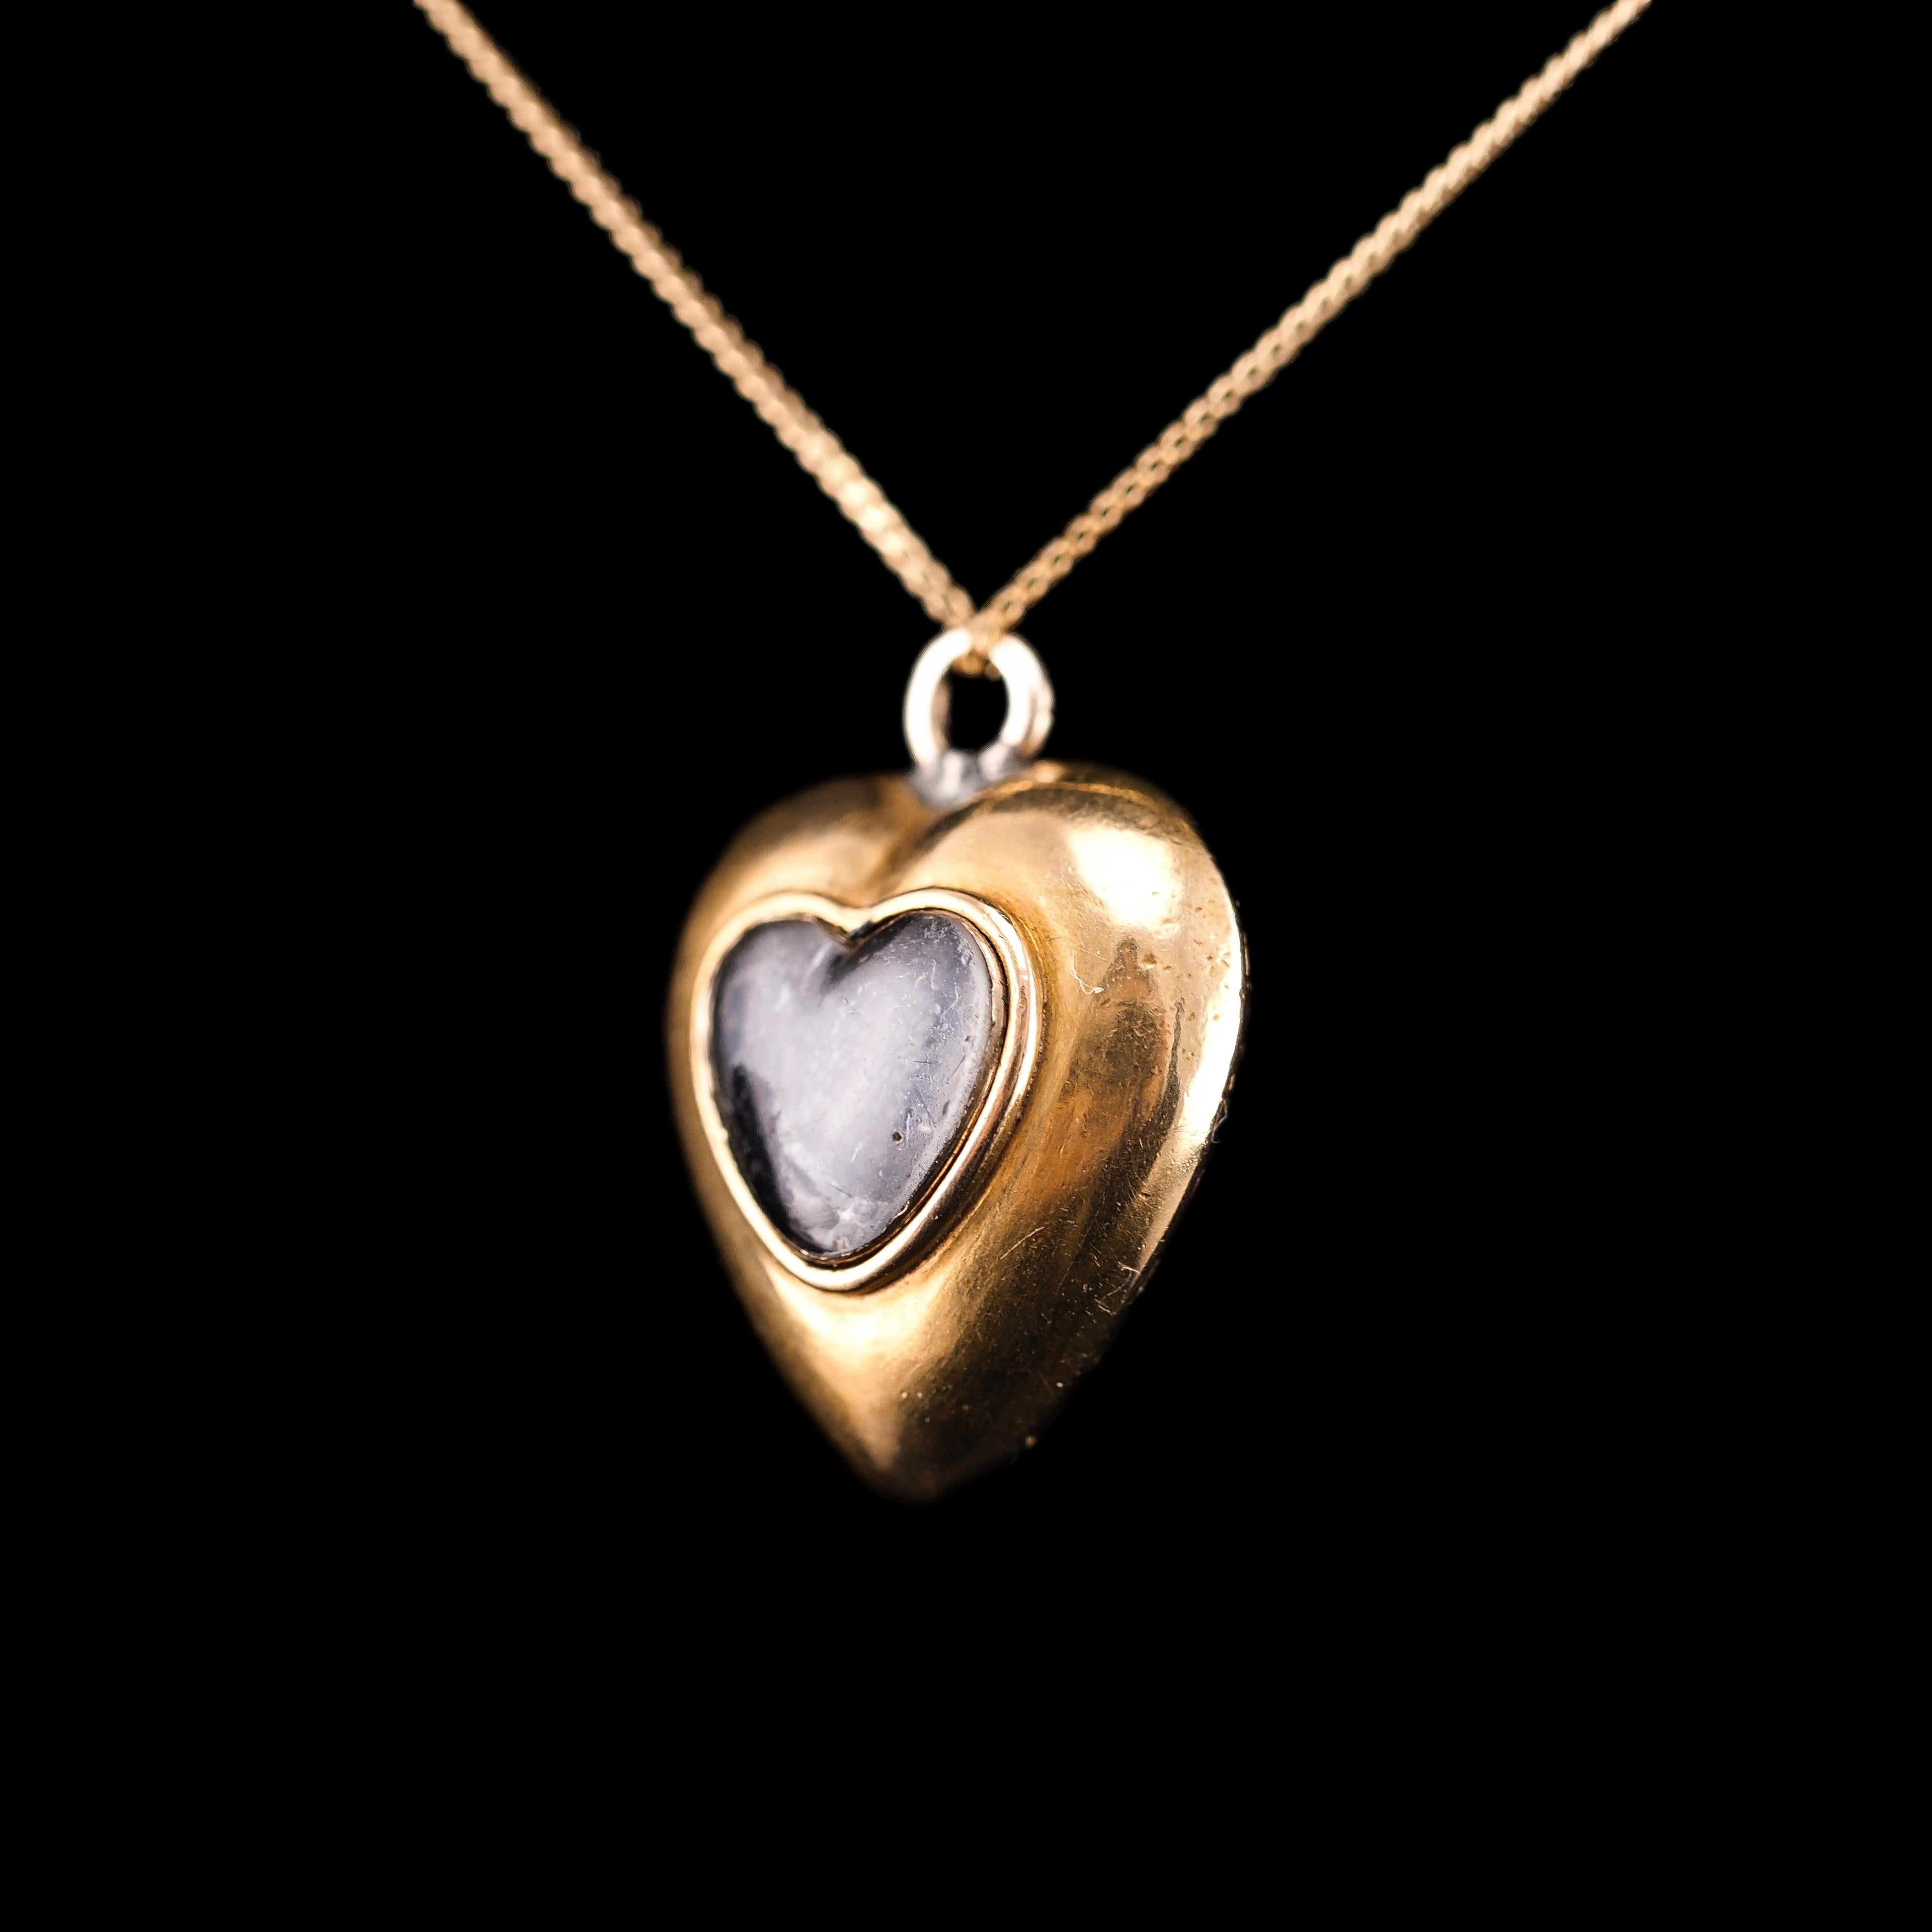 Antique 18K Gold Heart Charm Pendant Necklace with Pearl - Victorian c.1890 2